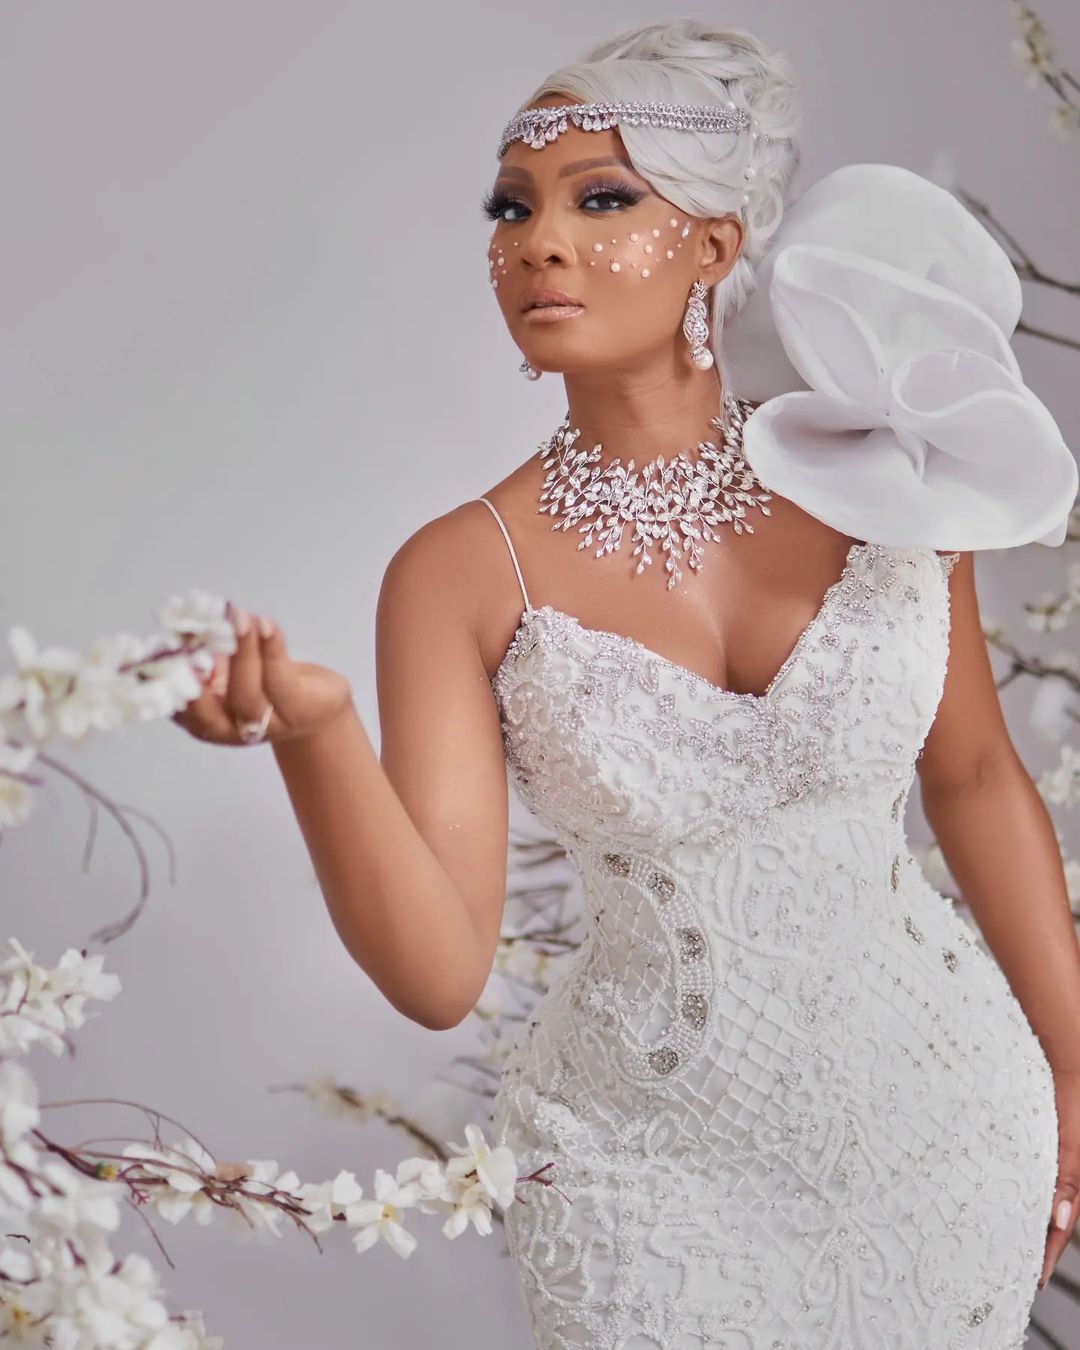 Osas Ighodaro Is An 'Ice Queen' in Tosho Woods Bespoke Luxury Bridal Collection - A Slice Of Naija